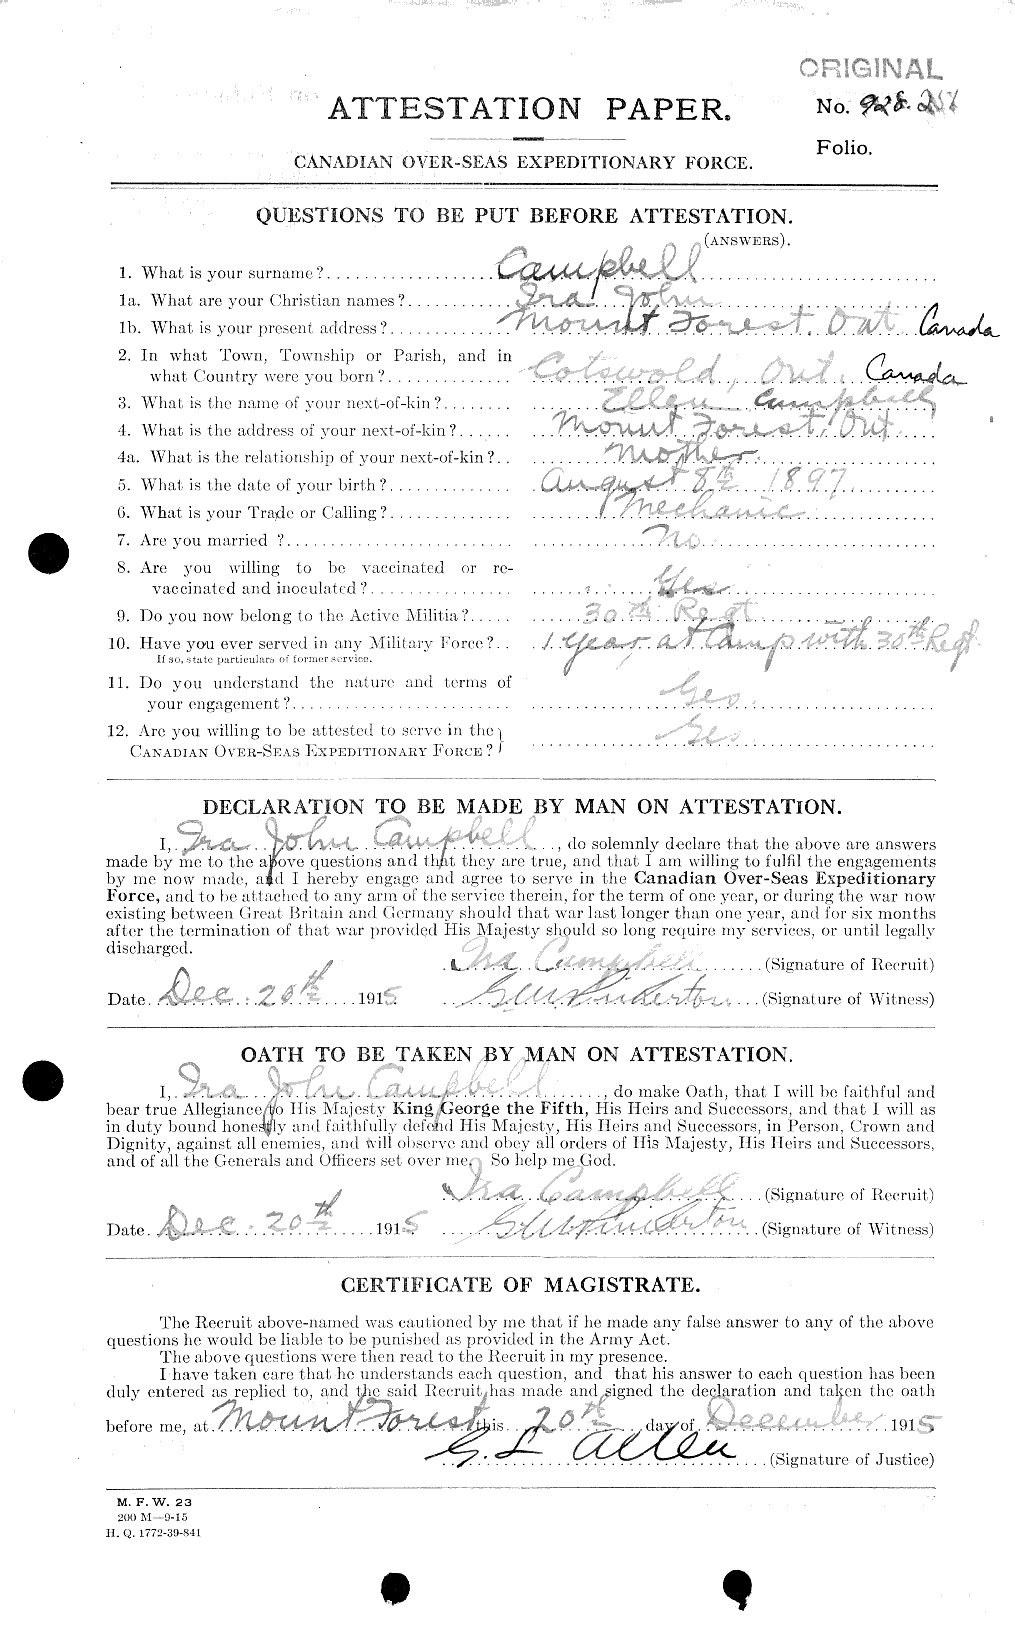 Personnel Records of the First World War - CEF 002748c